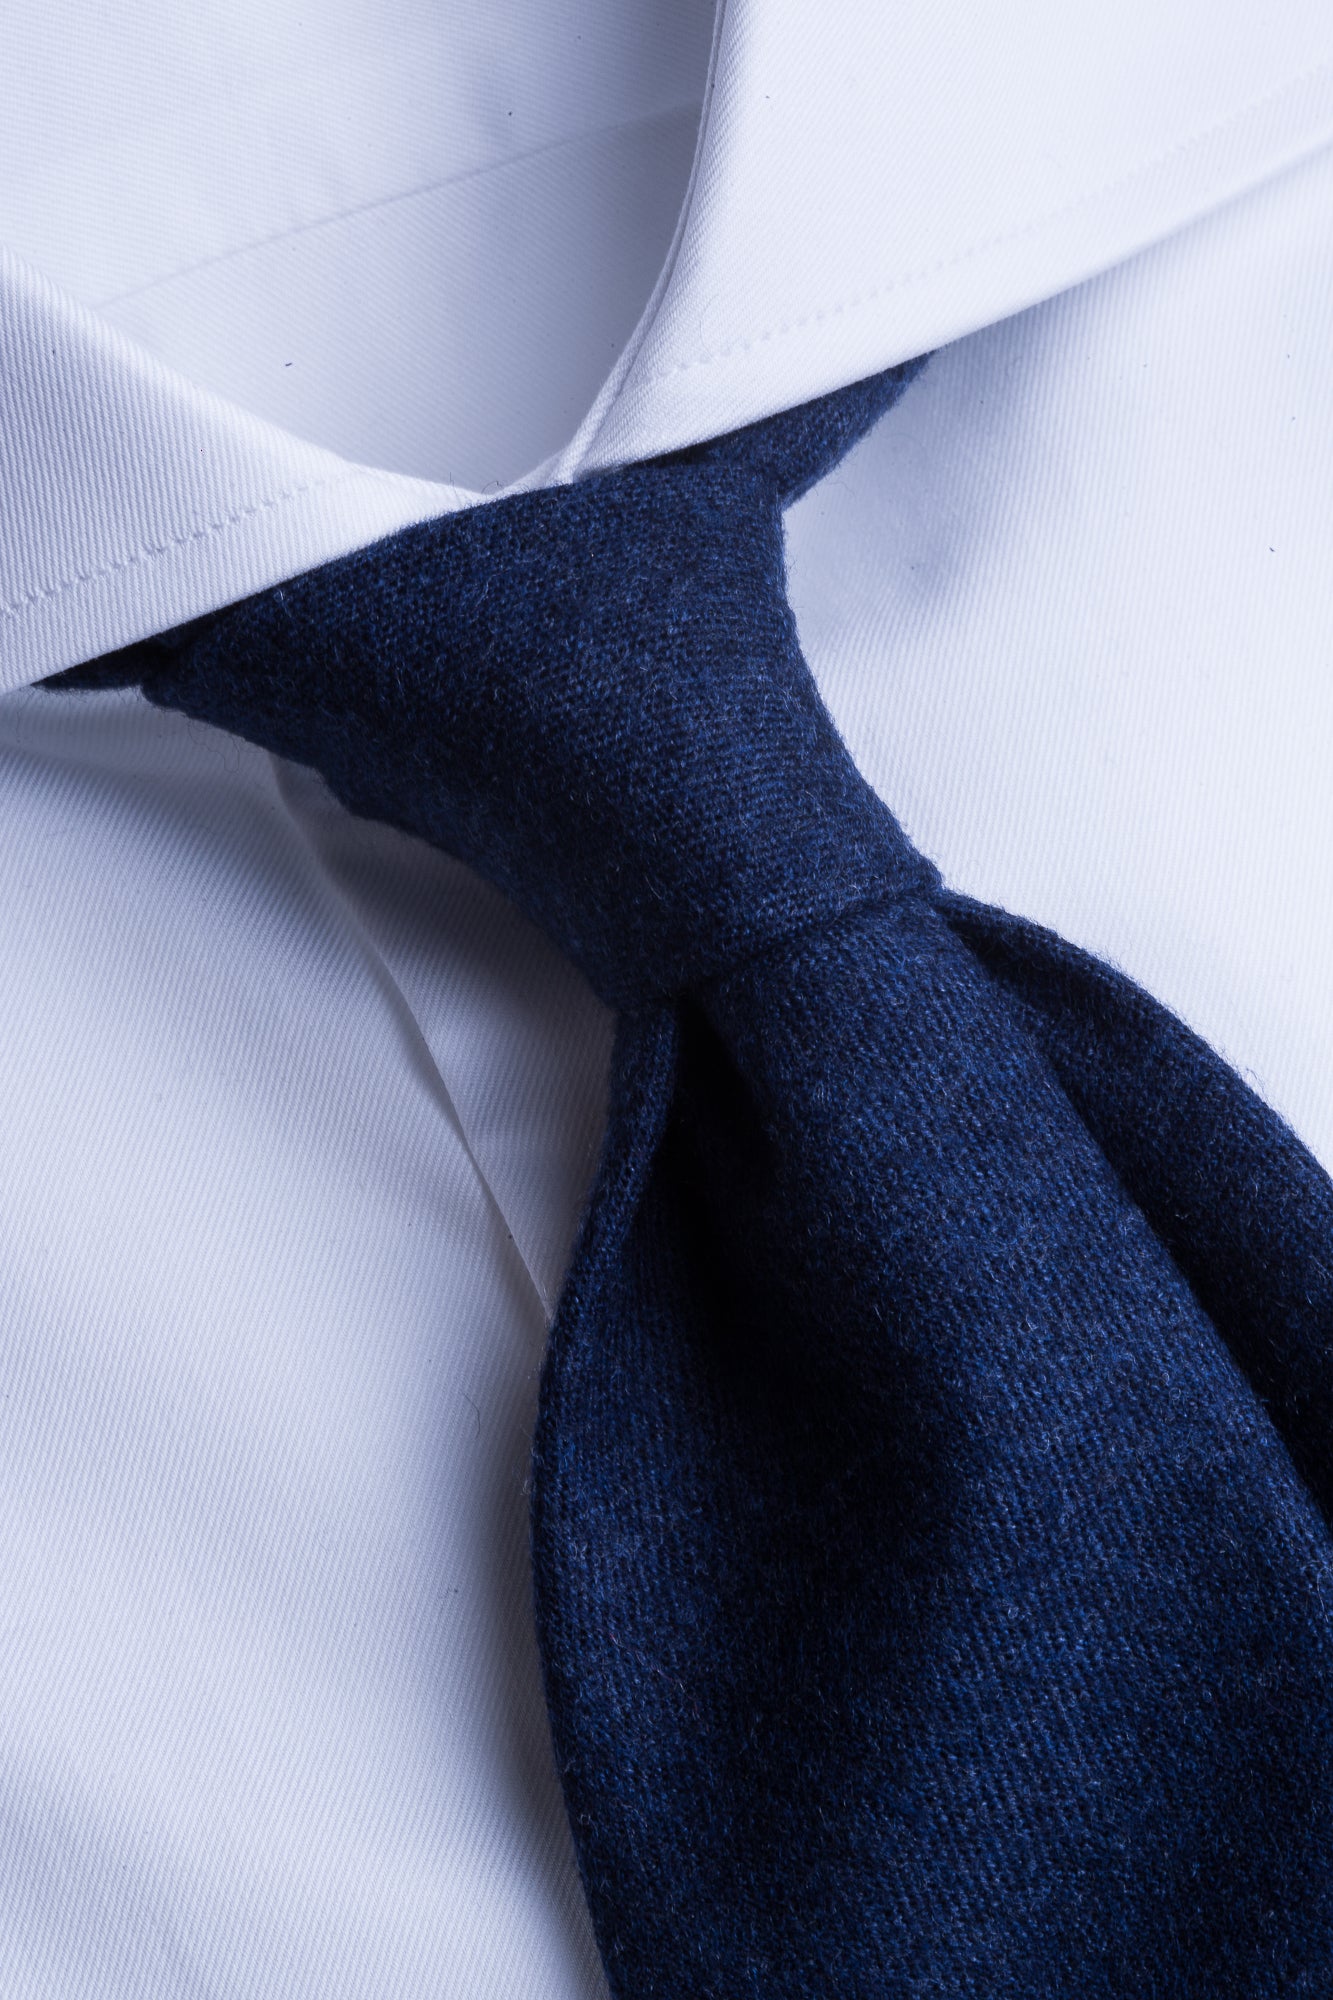 Blue flannel tie - Hand Made In Italy